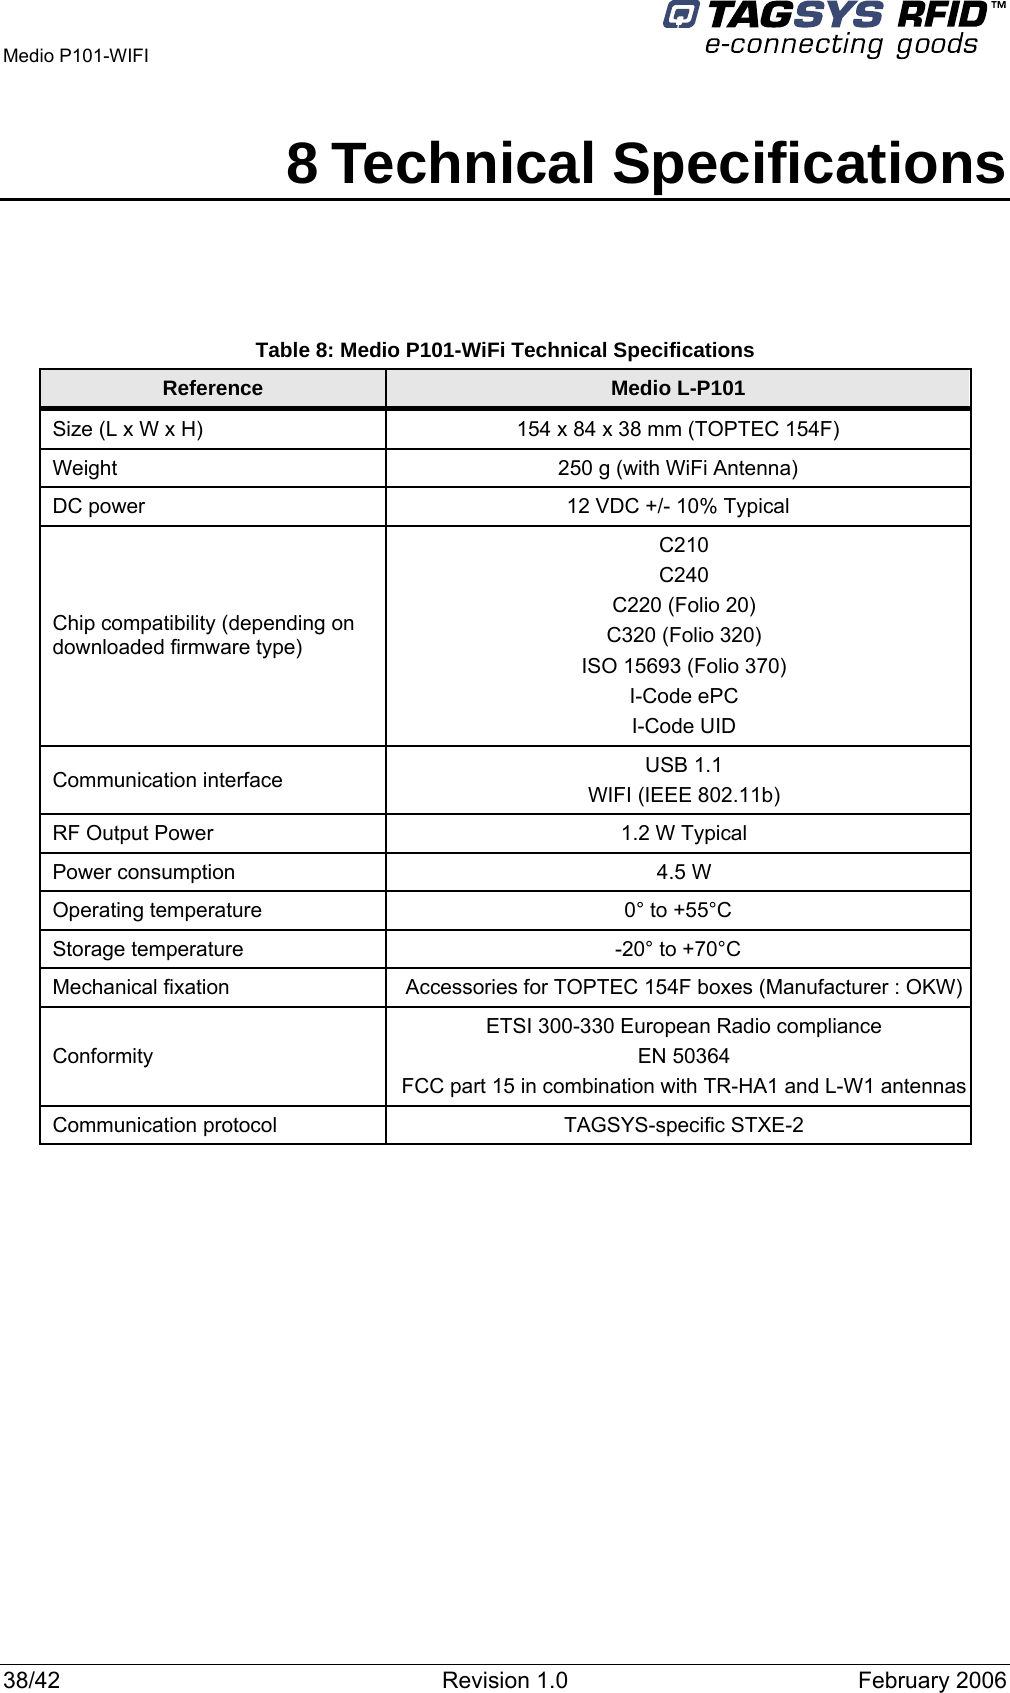  Medio P101-WIFI 38/42  Revision 1.0  February 2006 8 Technical Specifications   Table 8: Medio P101-WiFi Technical Specifications Reference  Medio L-P101 Size (L x W x H)  154 x 84 x 38 mm (TOPTEC 154F) Weight  250 g (with WiFi Antenna) DC power  12 VDC +/- 10% Typical Chip compatibility (depending on downloaded firmware type) C210 C240 C220 (Folio 20) C320 (Folio 320) ISO 15693 (Folio 370) I-Code ePC I-Code UID Communication interface  USB 1.1 WIFI (IEEE 802.11b) RF Output Power  1.2 W Typical Power consumption   4.5 W Operating temperature  0° to +55°C Storage temperature  -20° to +70°C Mechanical fixation  Accessories for TOPTEC 154F boxes (Manufacturer : OKW)Conformity ETSI 300-330 European Radio compliance EN 50364 FCC part 15 in combination with TR-HA1 and L-W1 antennasCommunication protocol  TAGSYS-specific STXE-2    